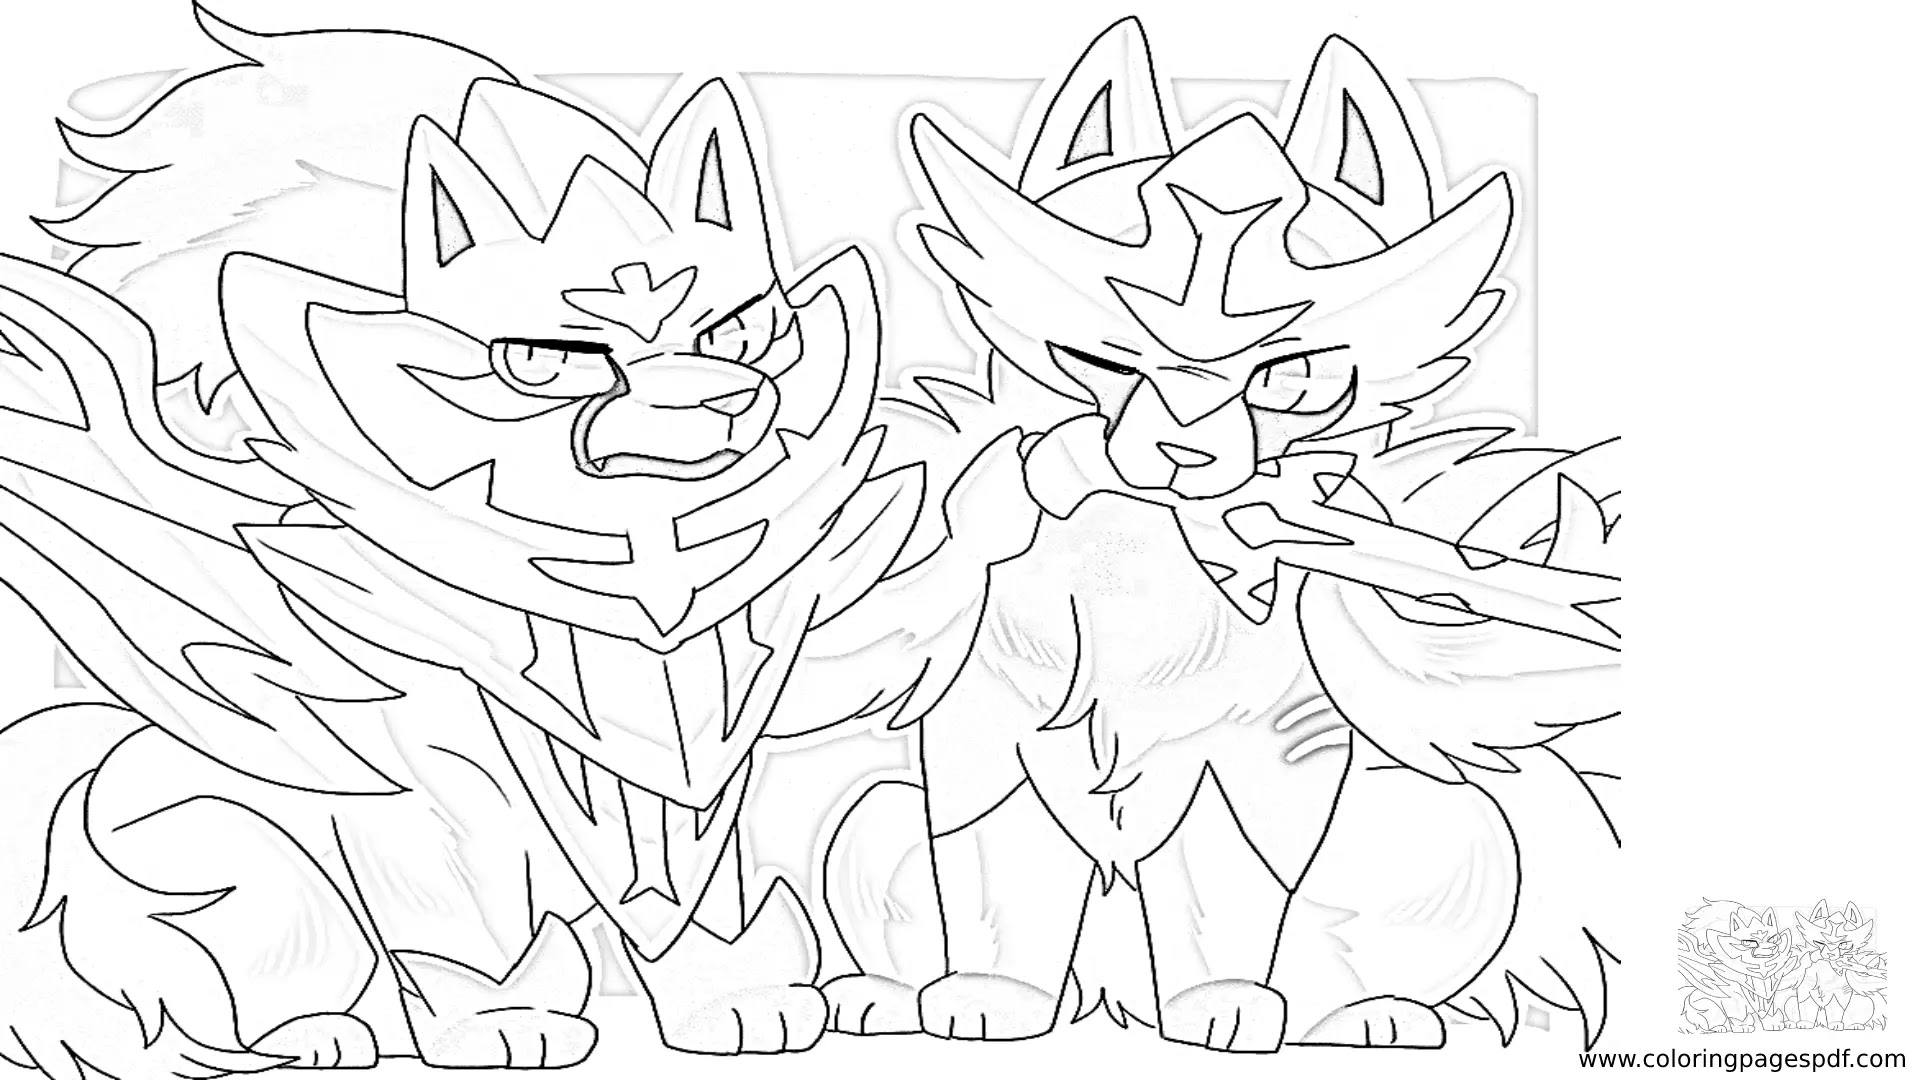 Coloring Page Of A Young Zacian And Zamazenta